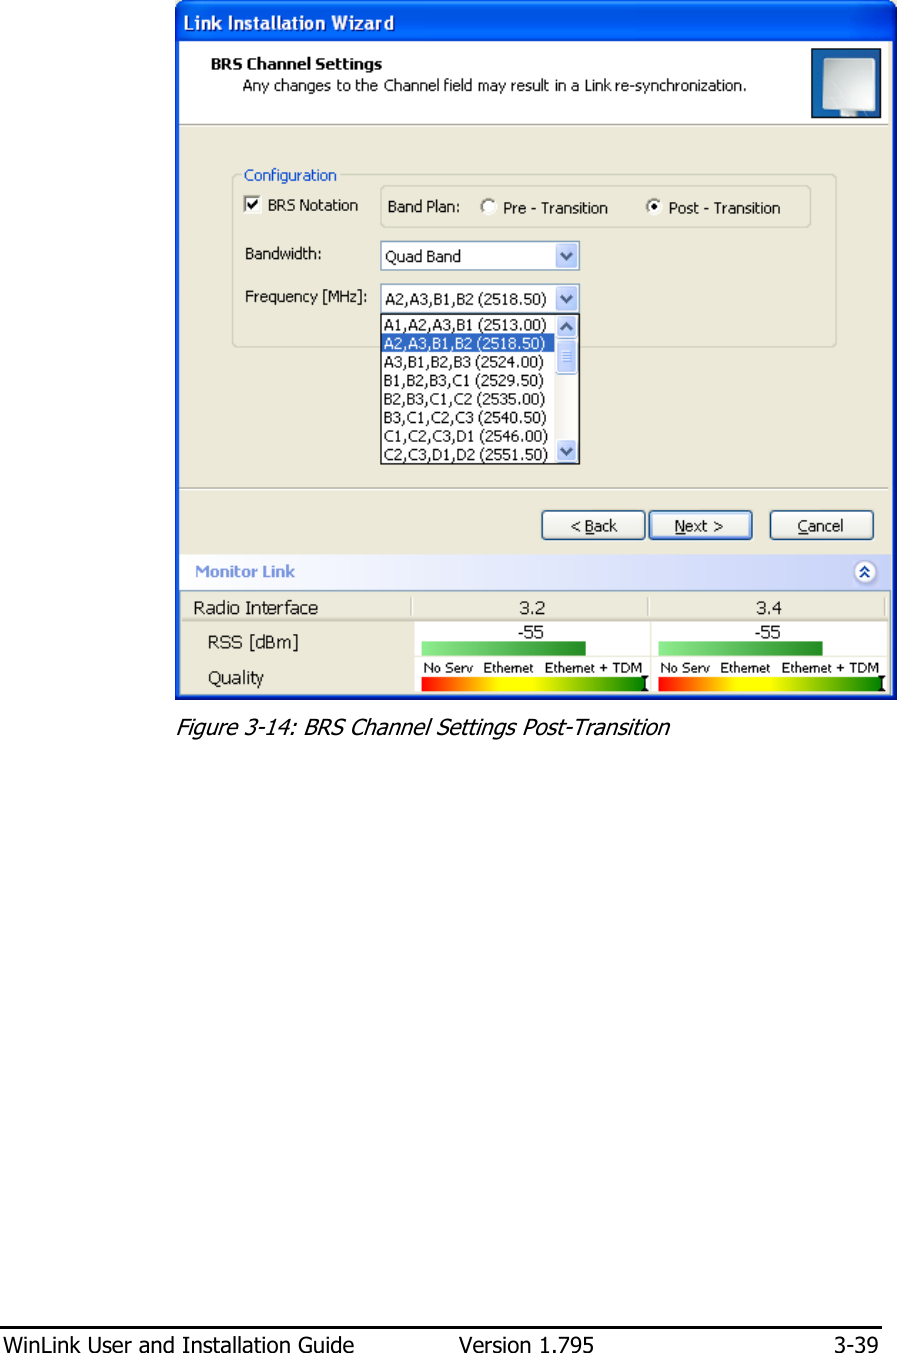  WinLink User and Installation Guide  Version 1.795  3-39   Figure  3-14: BRS Channel Settings Post-Transition  